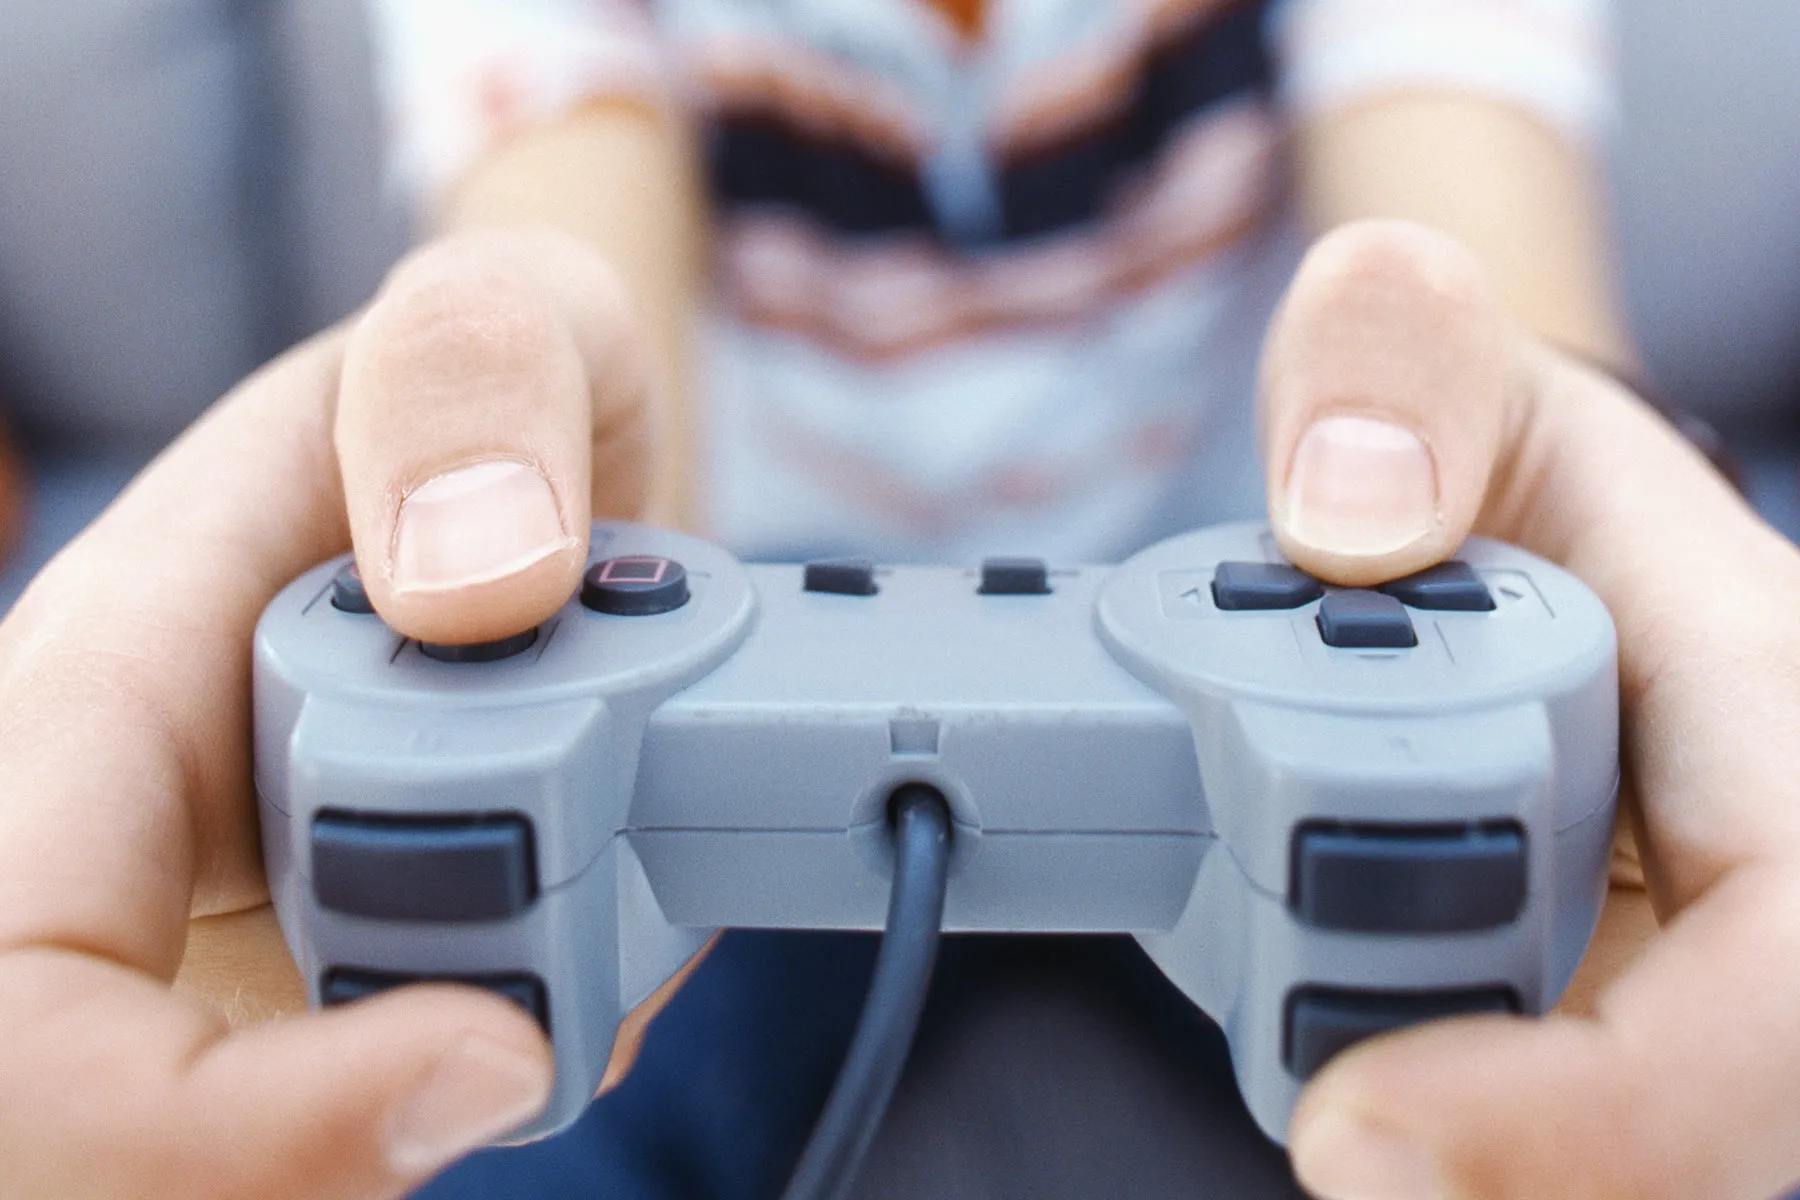 Could Video Games Boost a Child’s Intelligence?